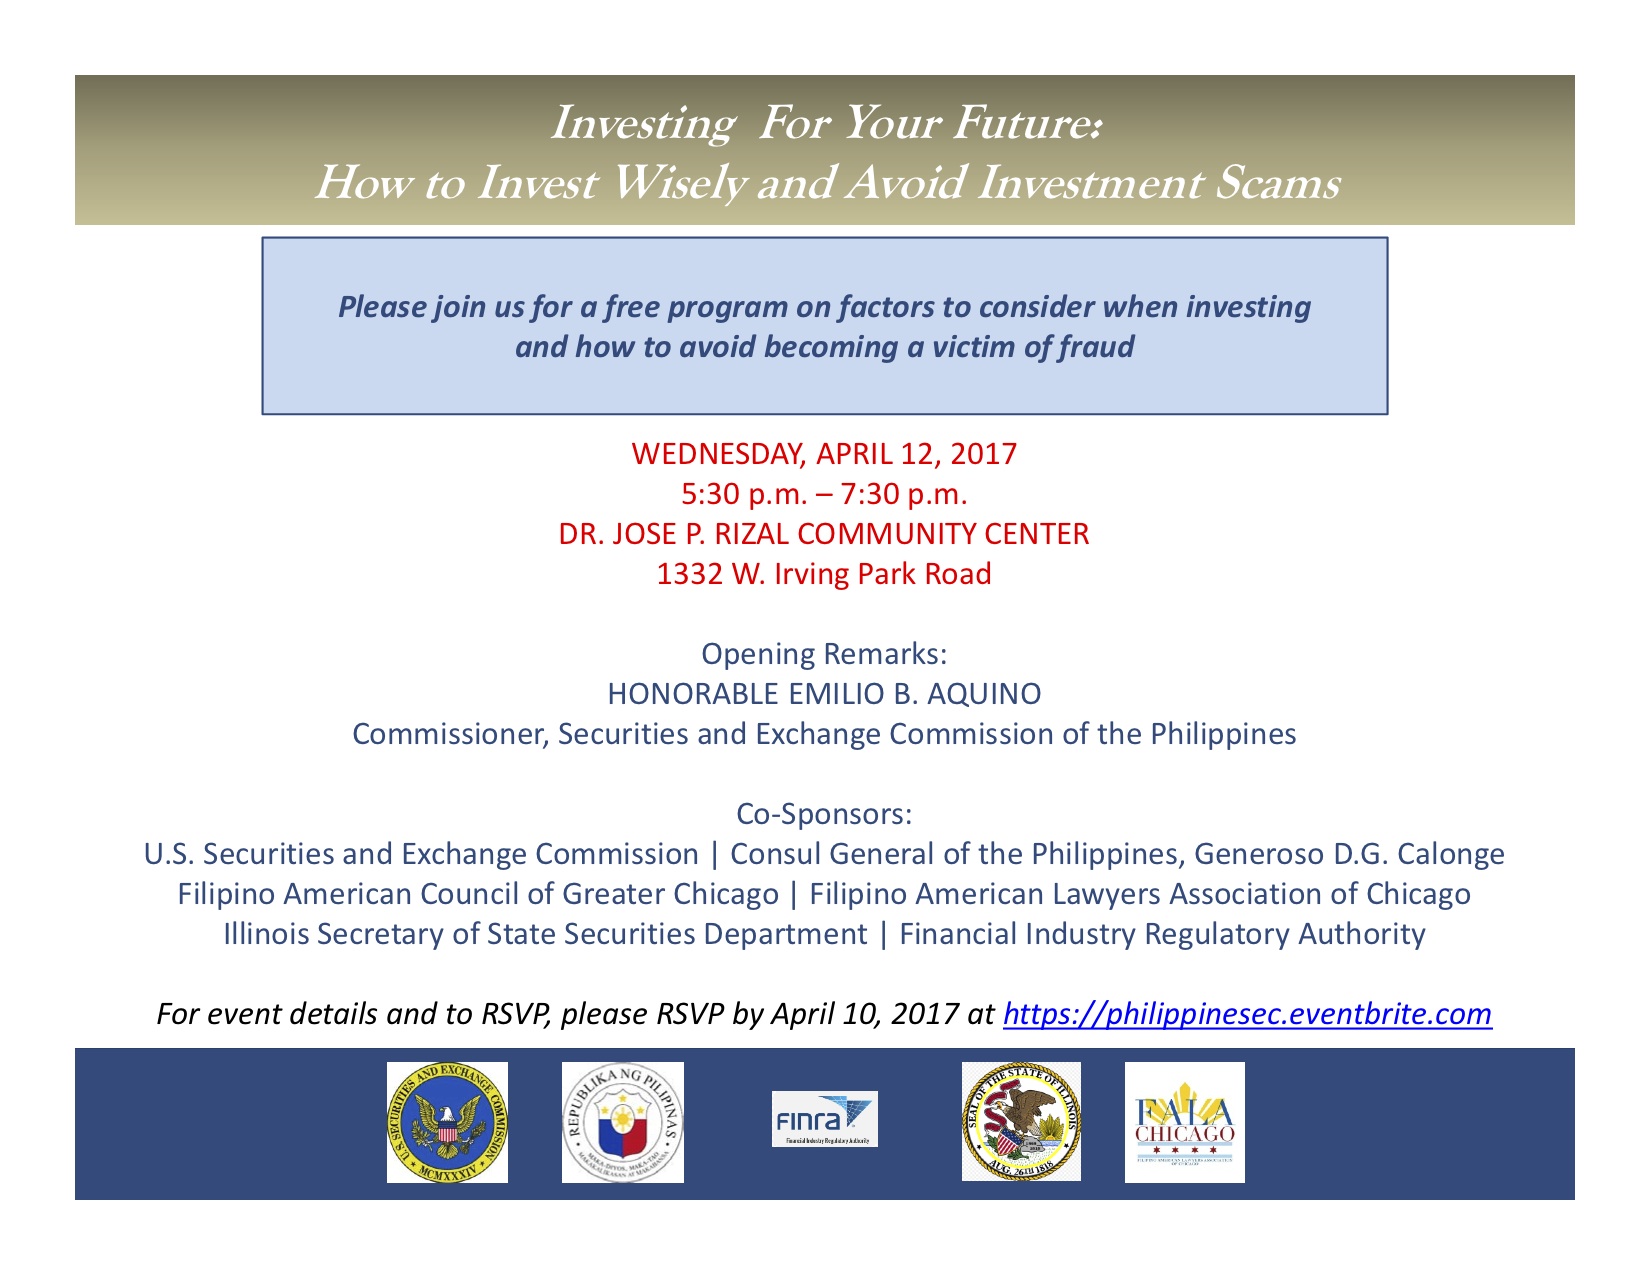 Chicago forum on investing wisely, avoiding scams